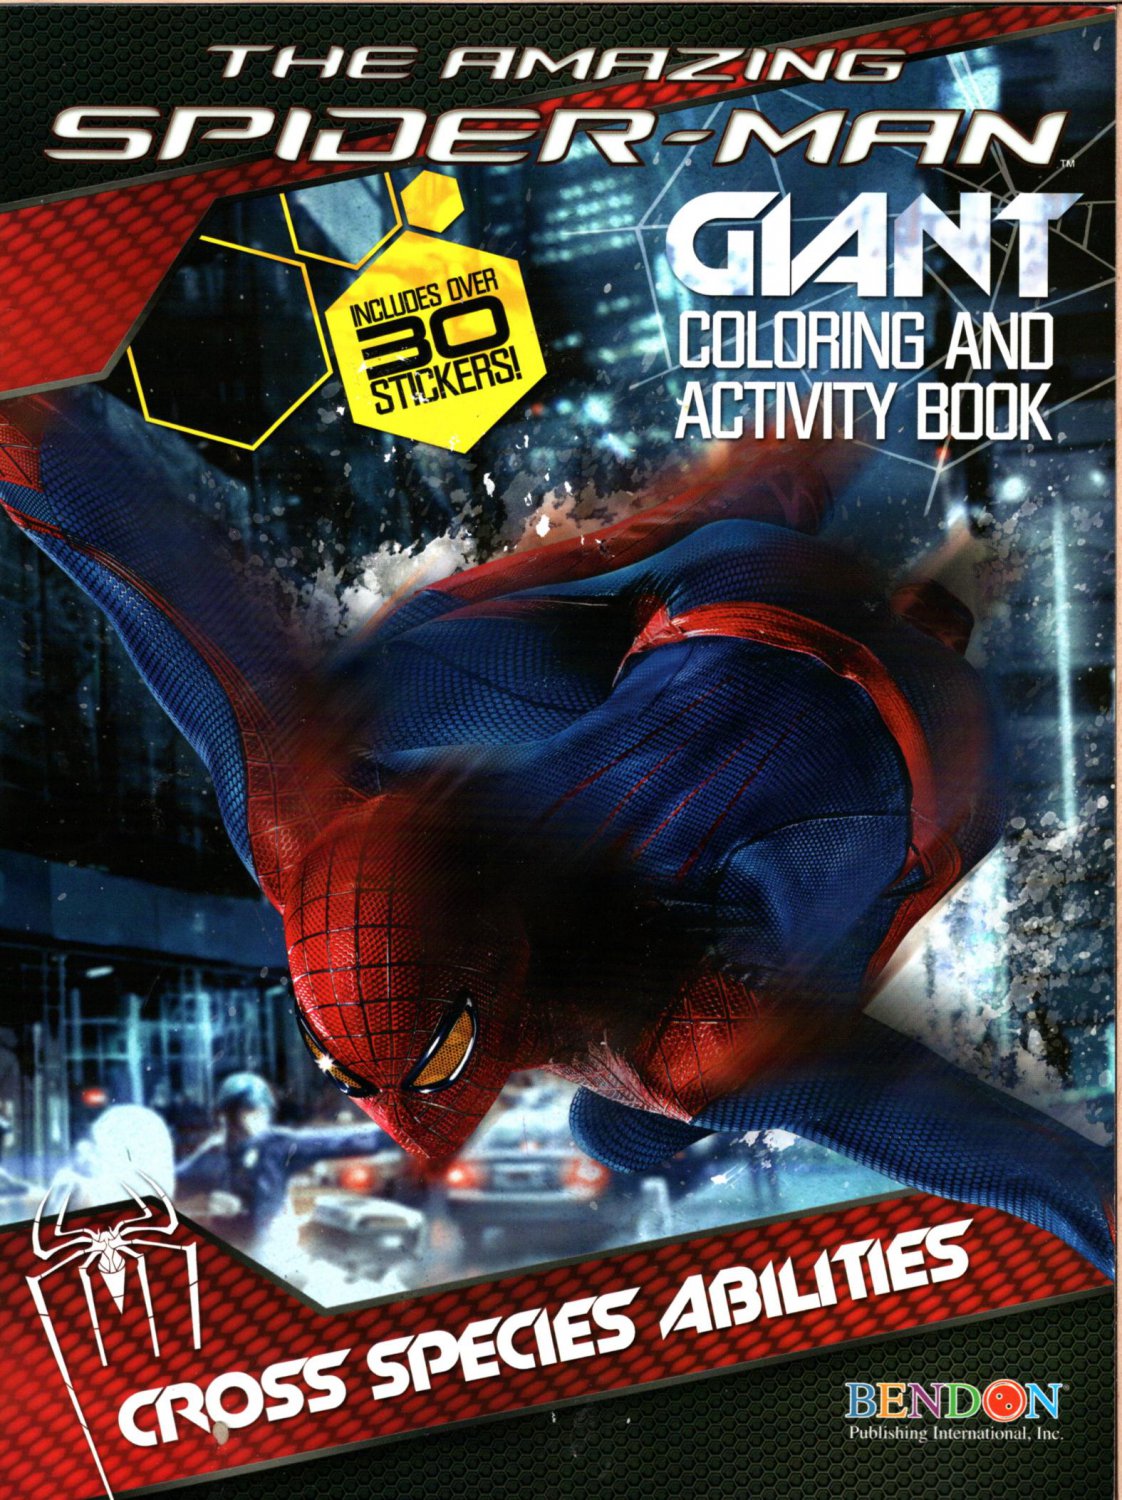 The Amazing Spider-Man - Giant Coloring & Activity Books - Cross Species Abilities